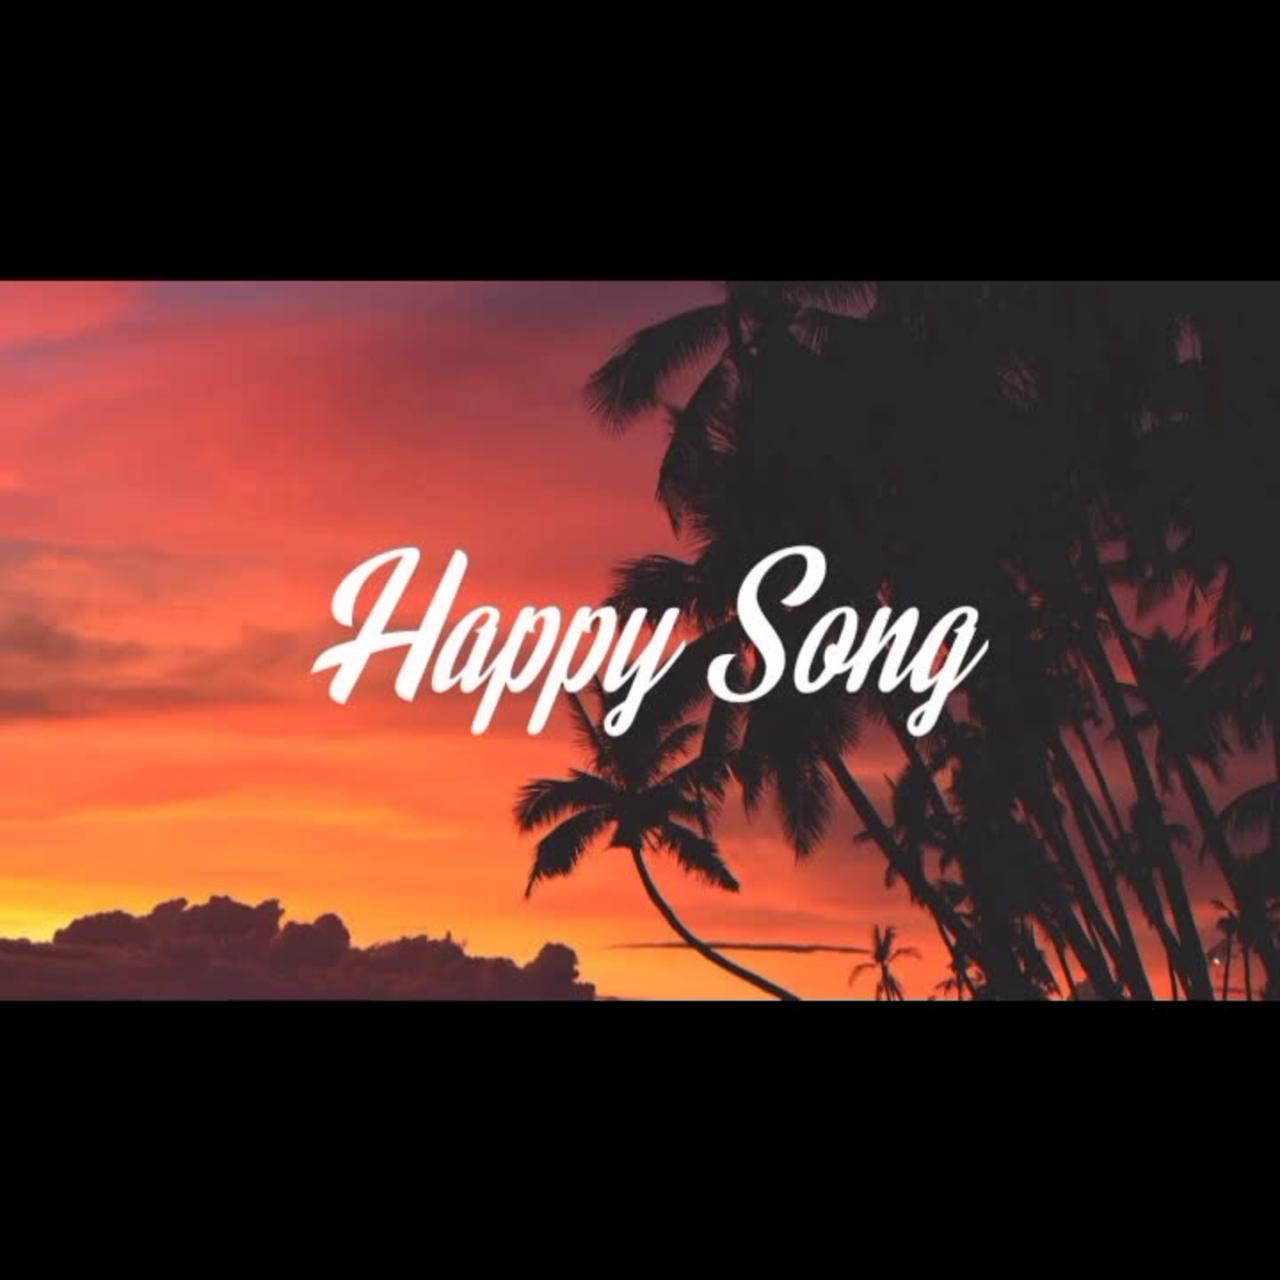 Happy song - travel vlog (royalty free music for YouTube video)